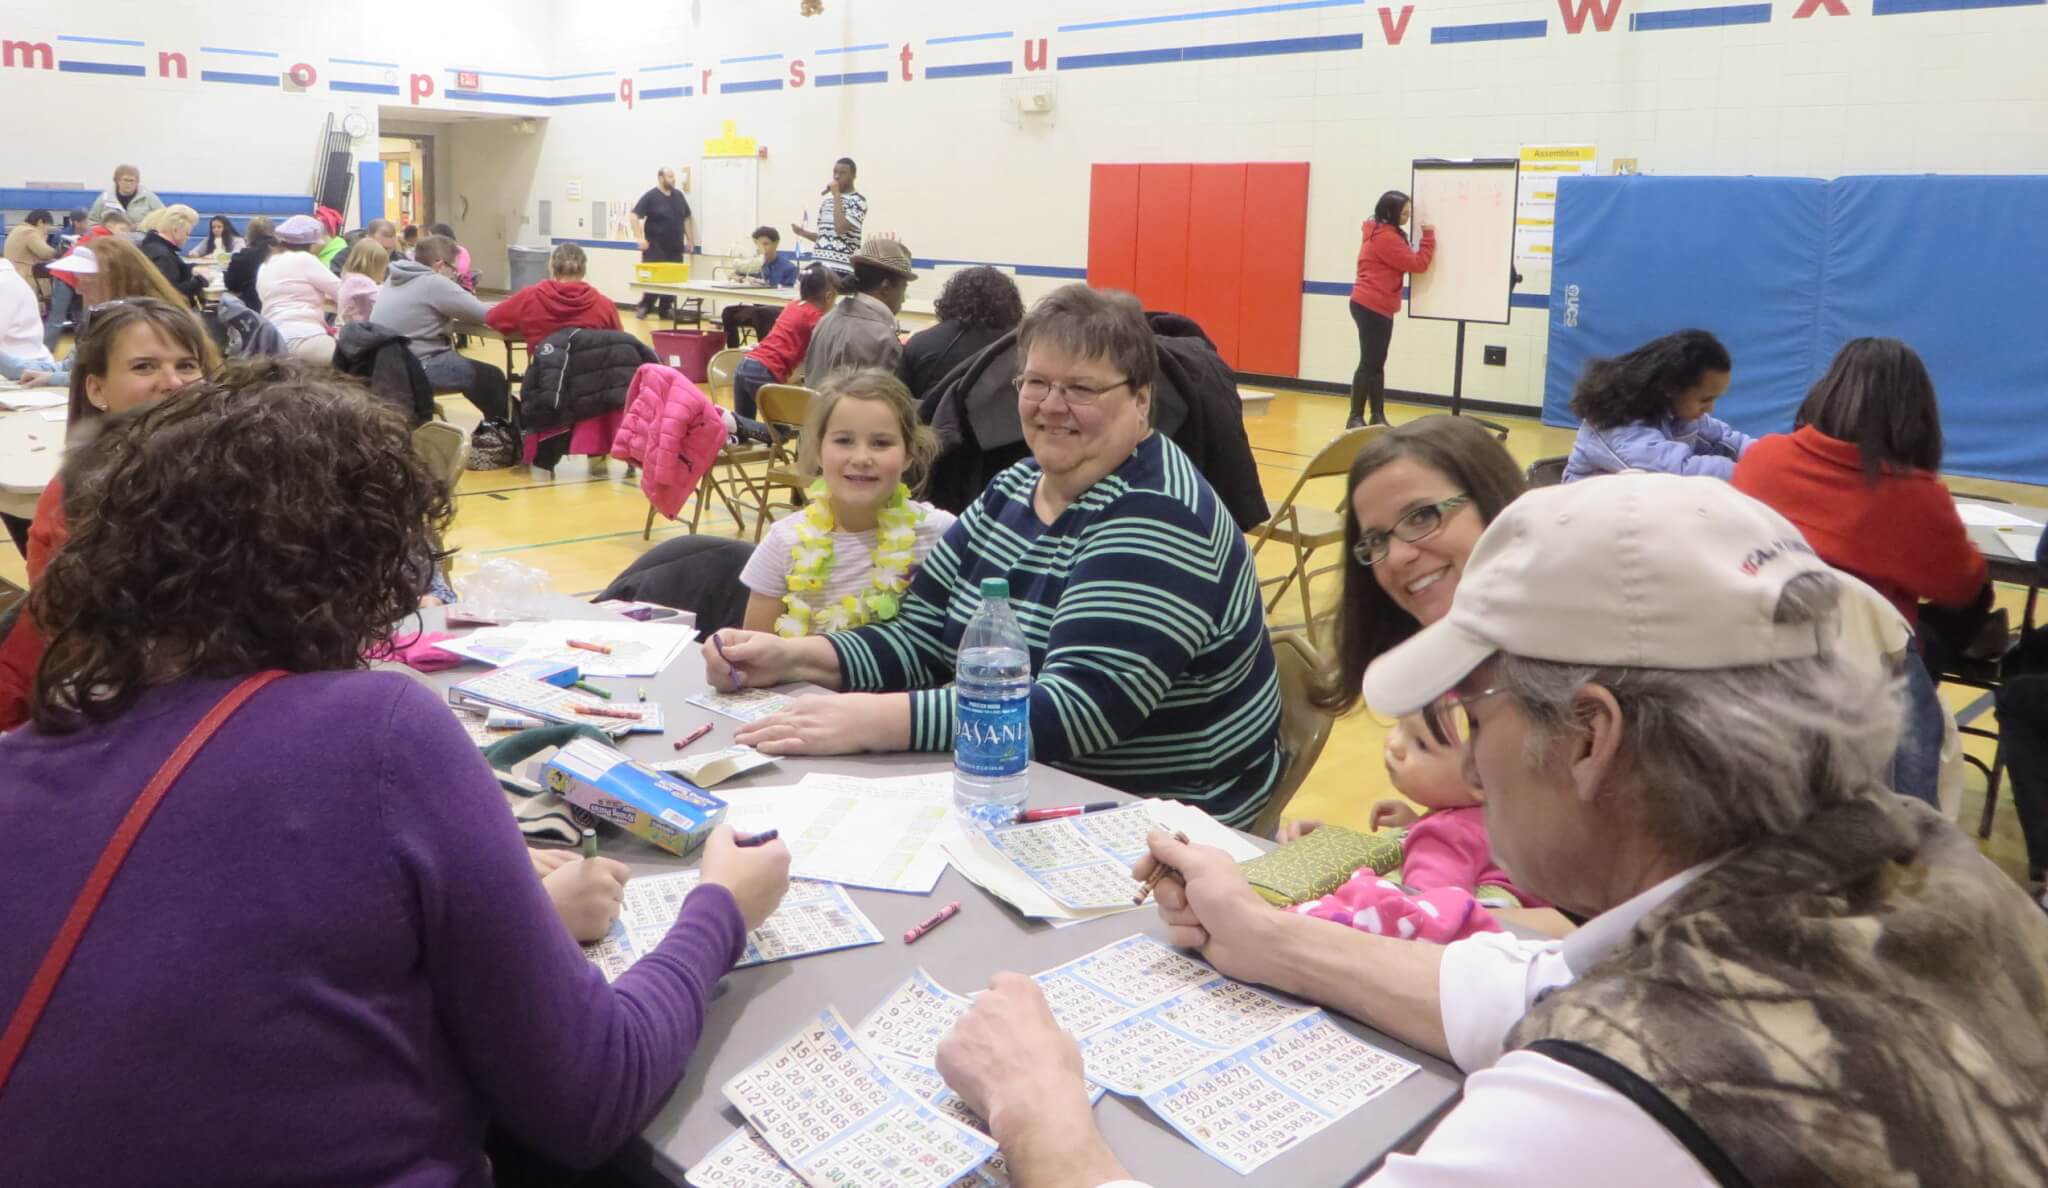 Family playing BINGO in a gym